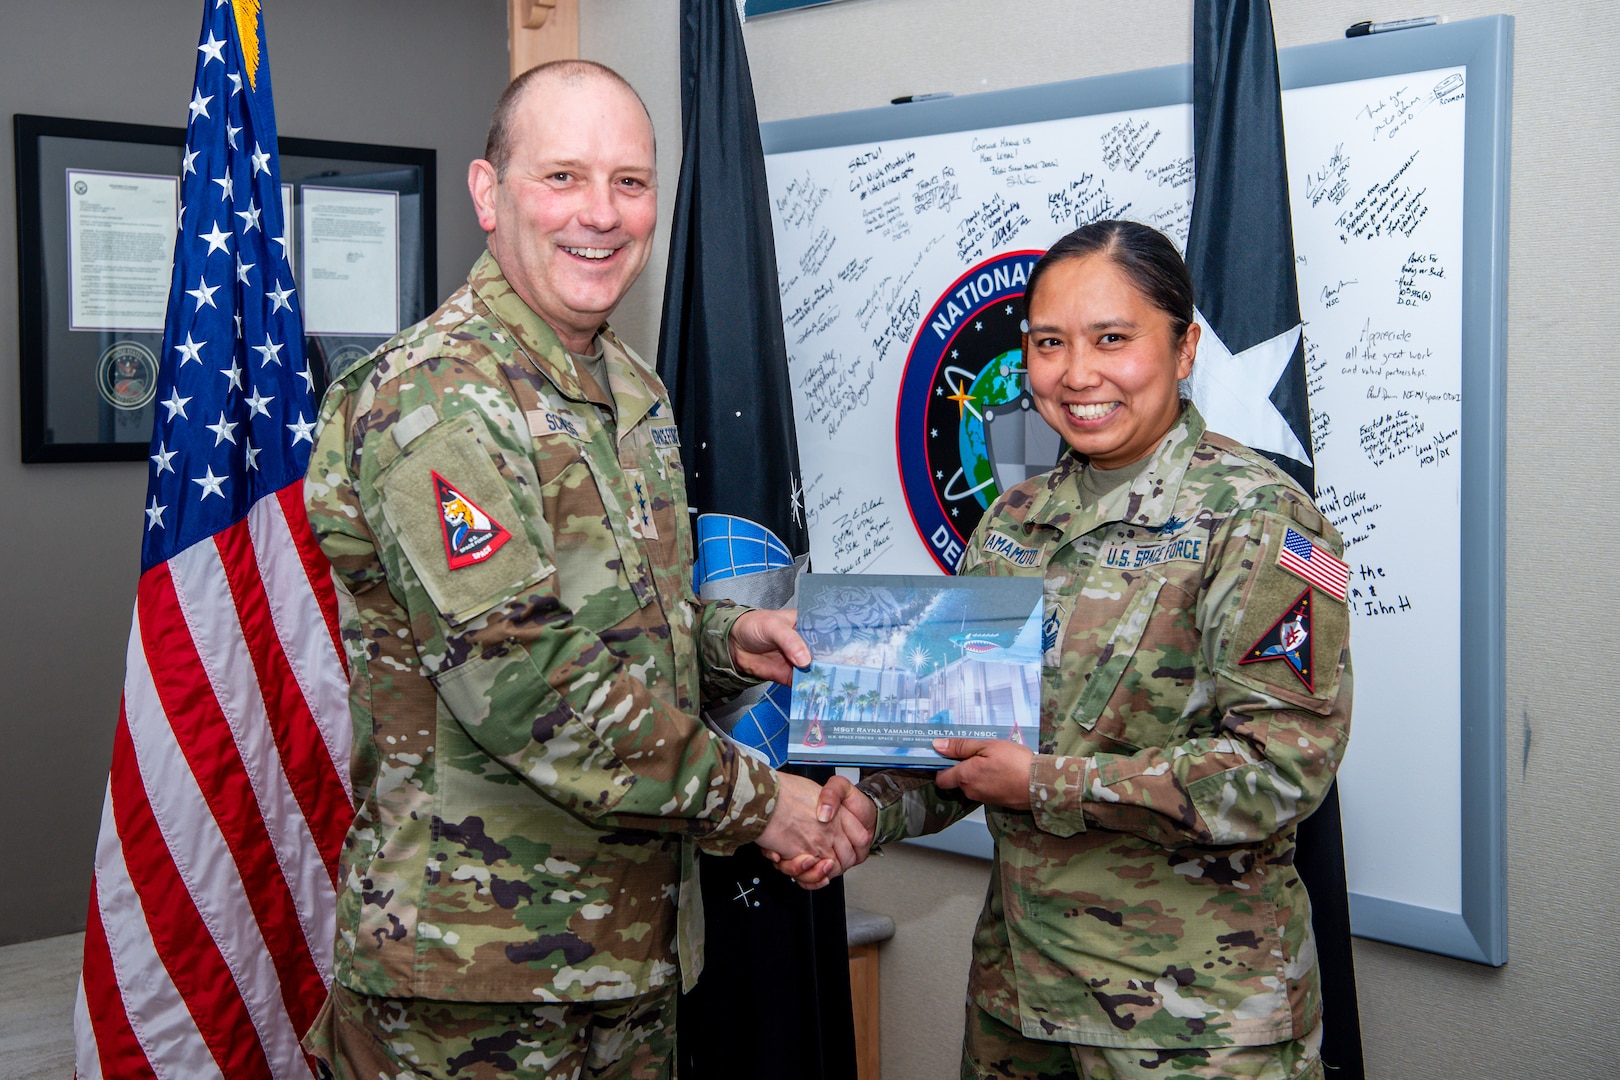 Two military members shaking hands and holding award plaque